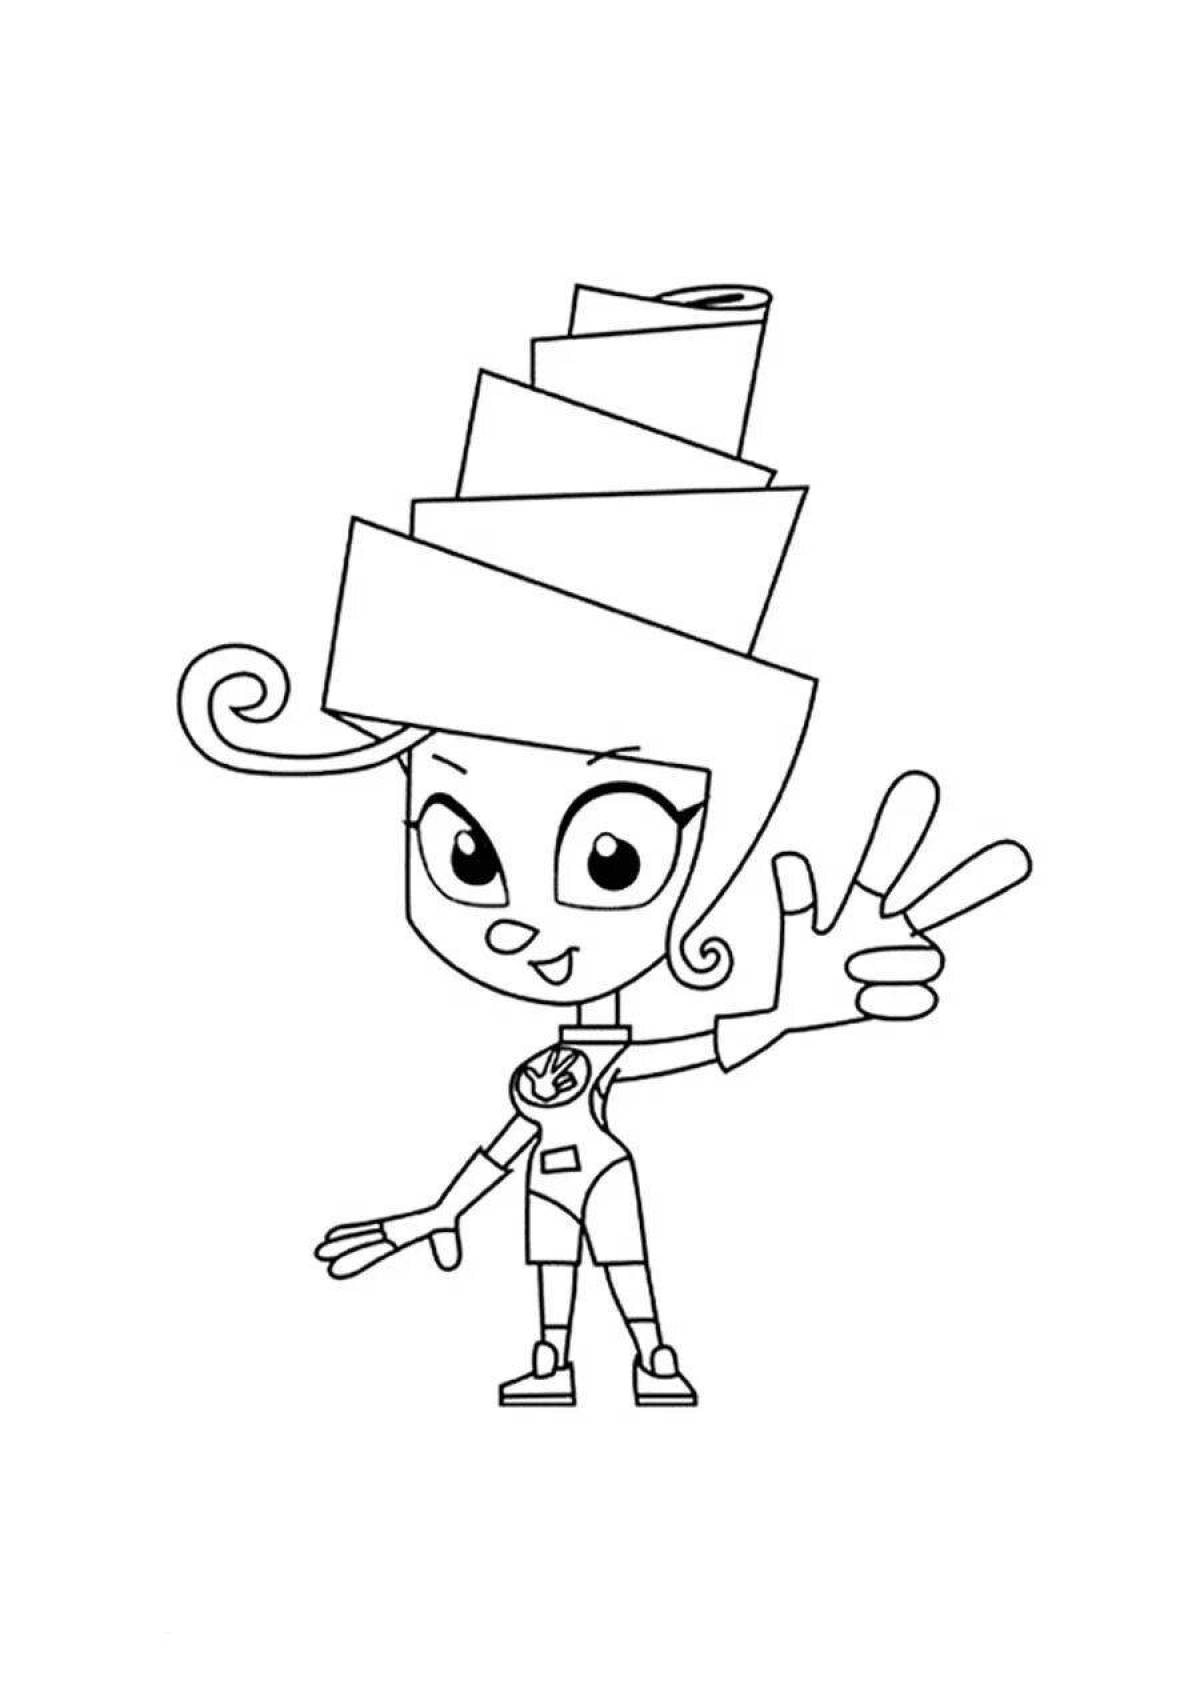 Animated reel coloring page